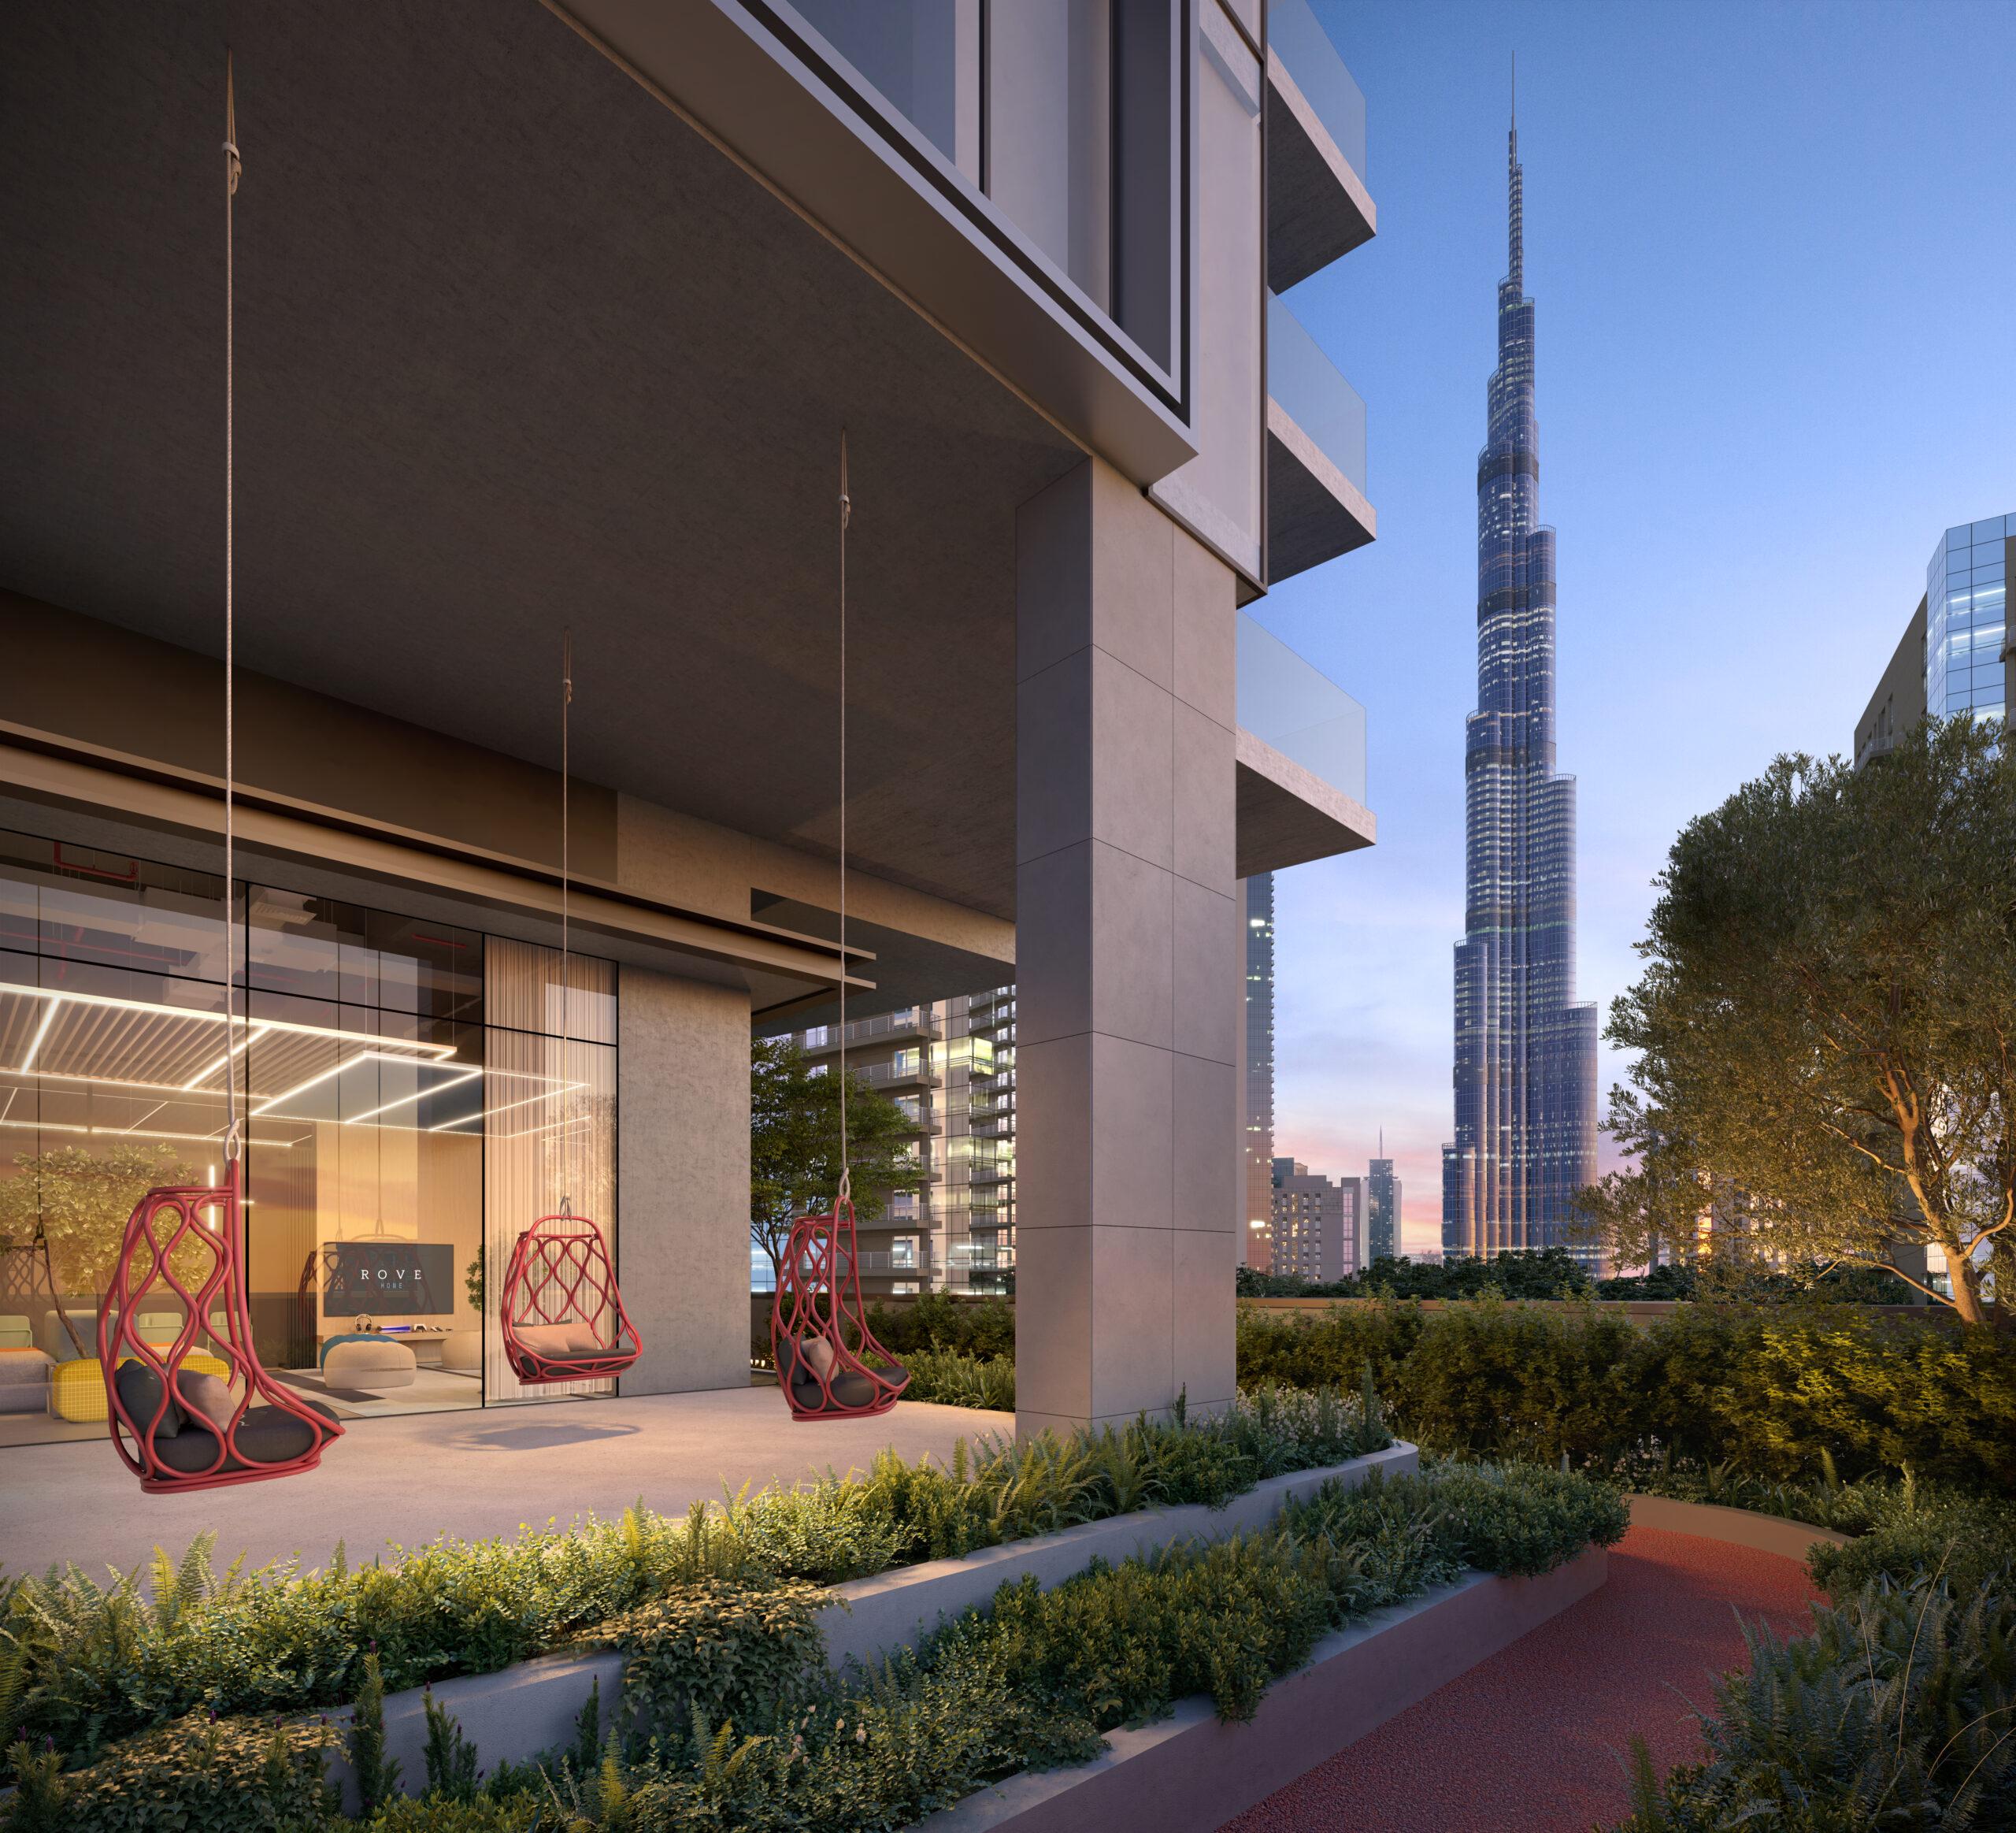 Rove announces its first branded residences project in Dubai